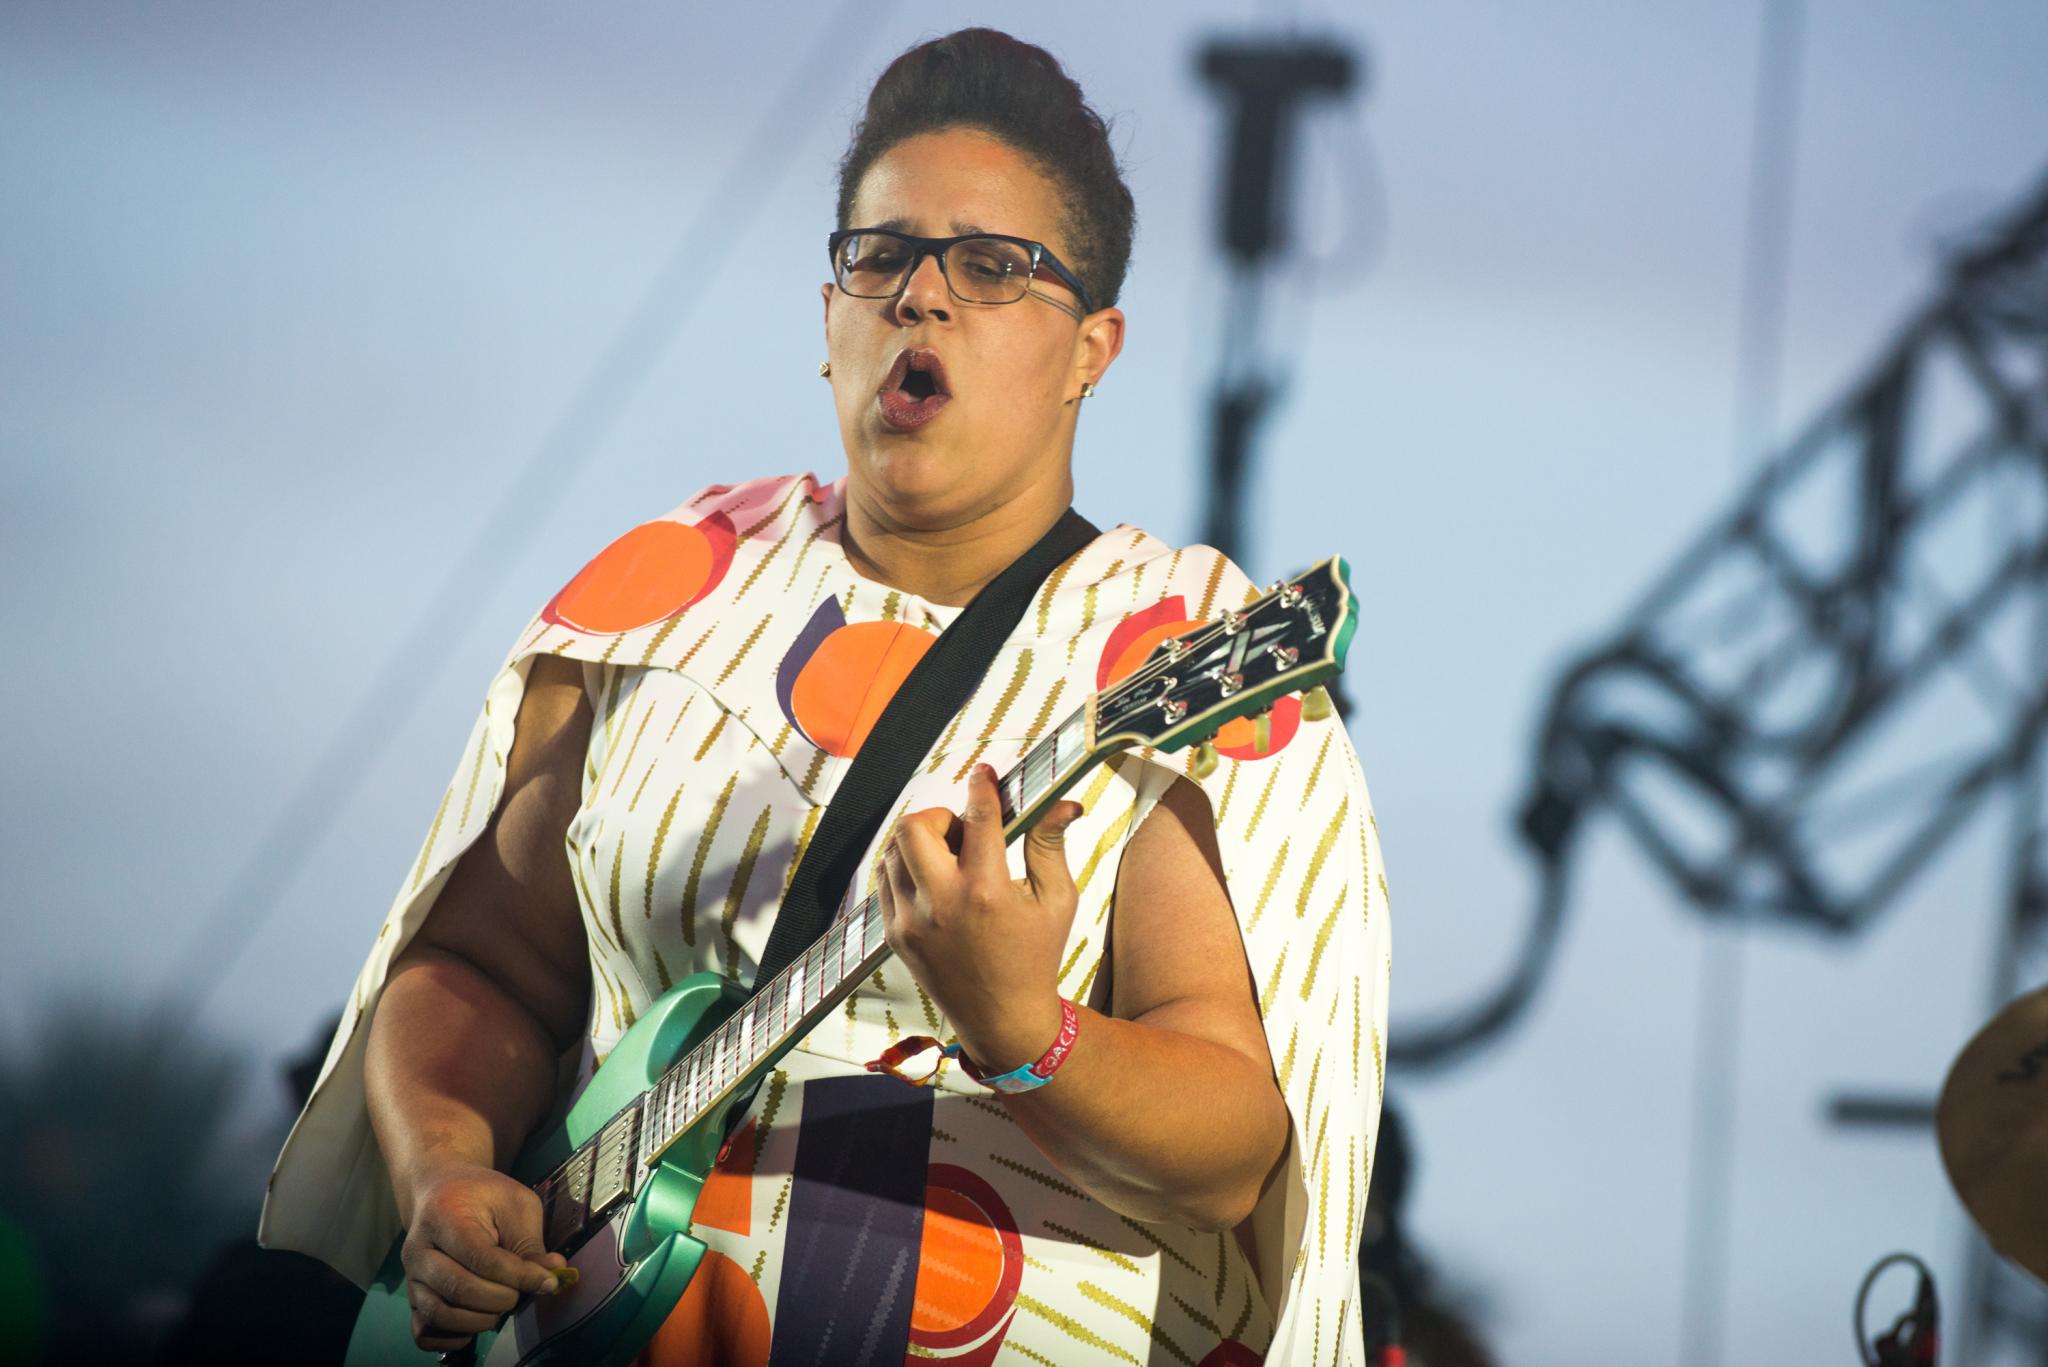 Alabama Shakes’ Brittany Howard Talks New Album, Songwriting in the Basement